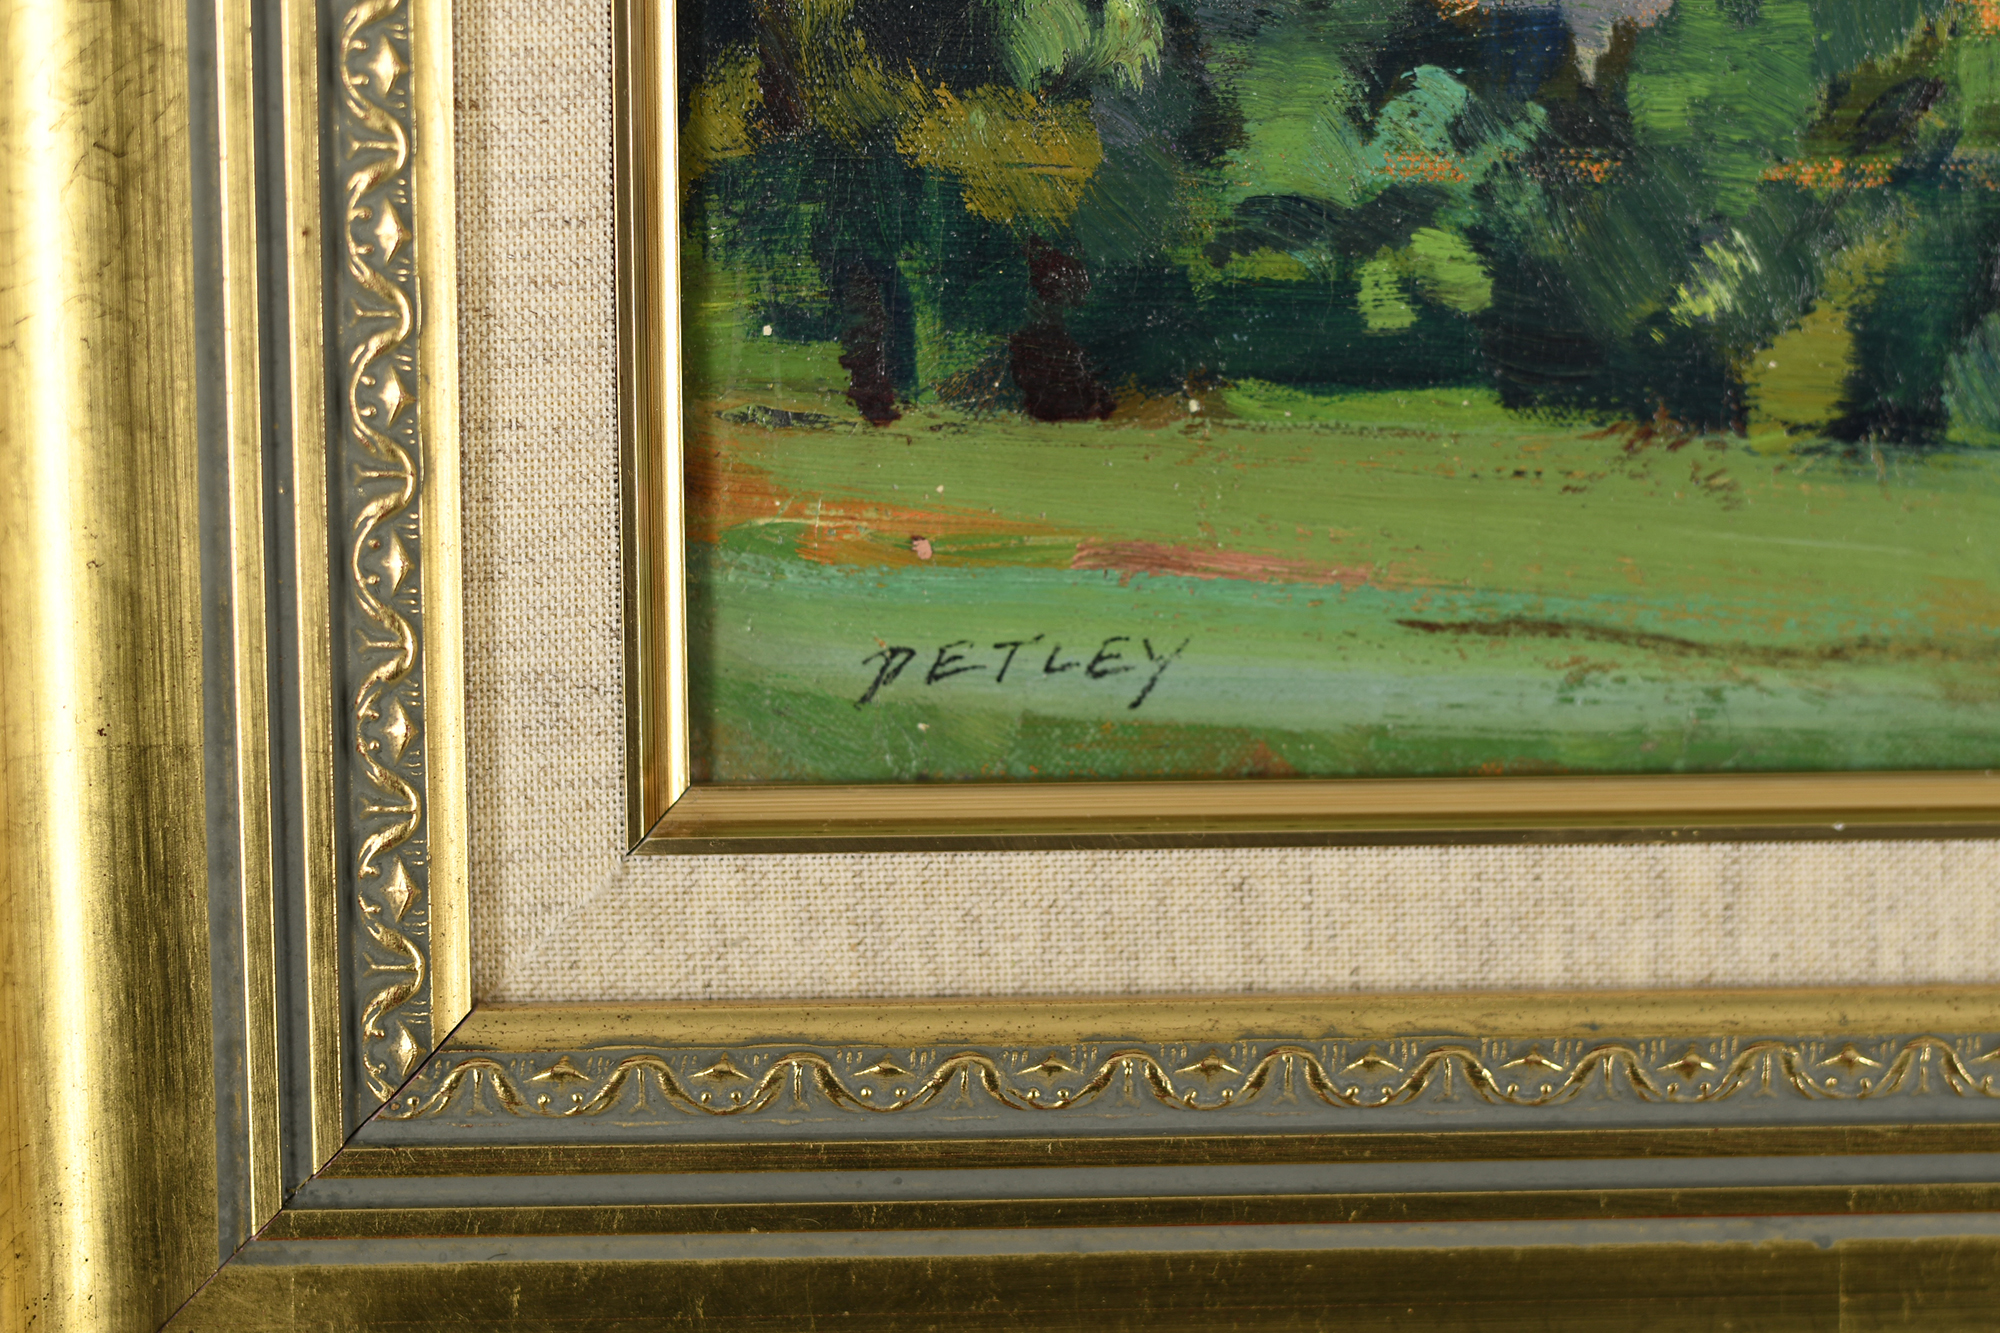 Original Framed Oil on Canvas by Petley - Image 3 of 4